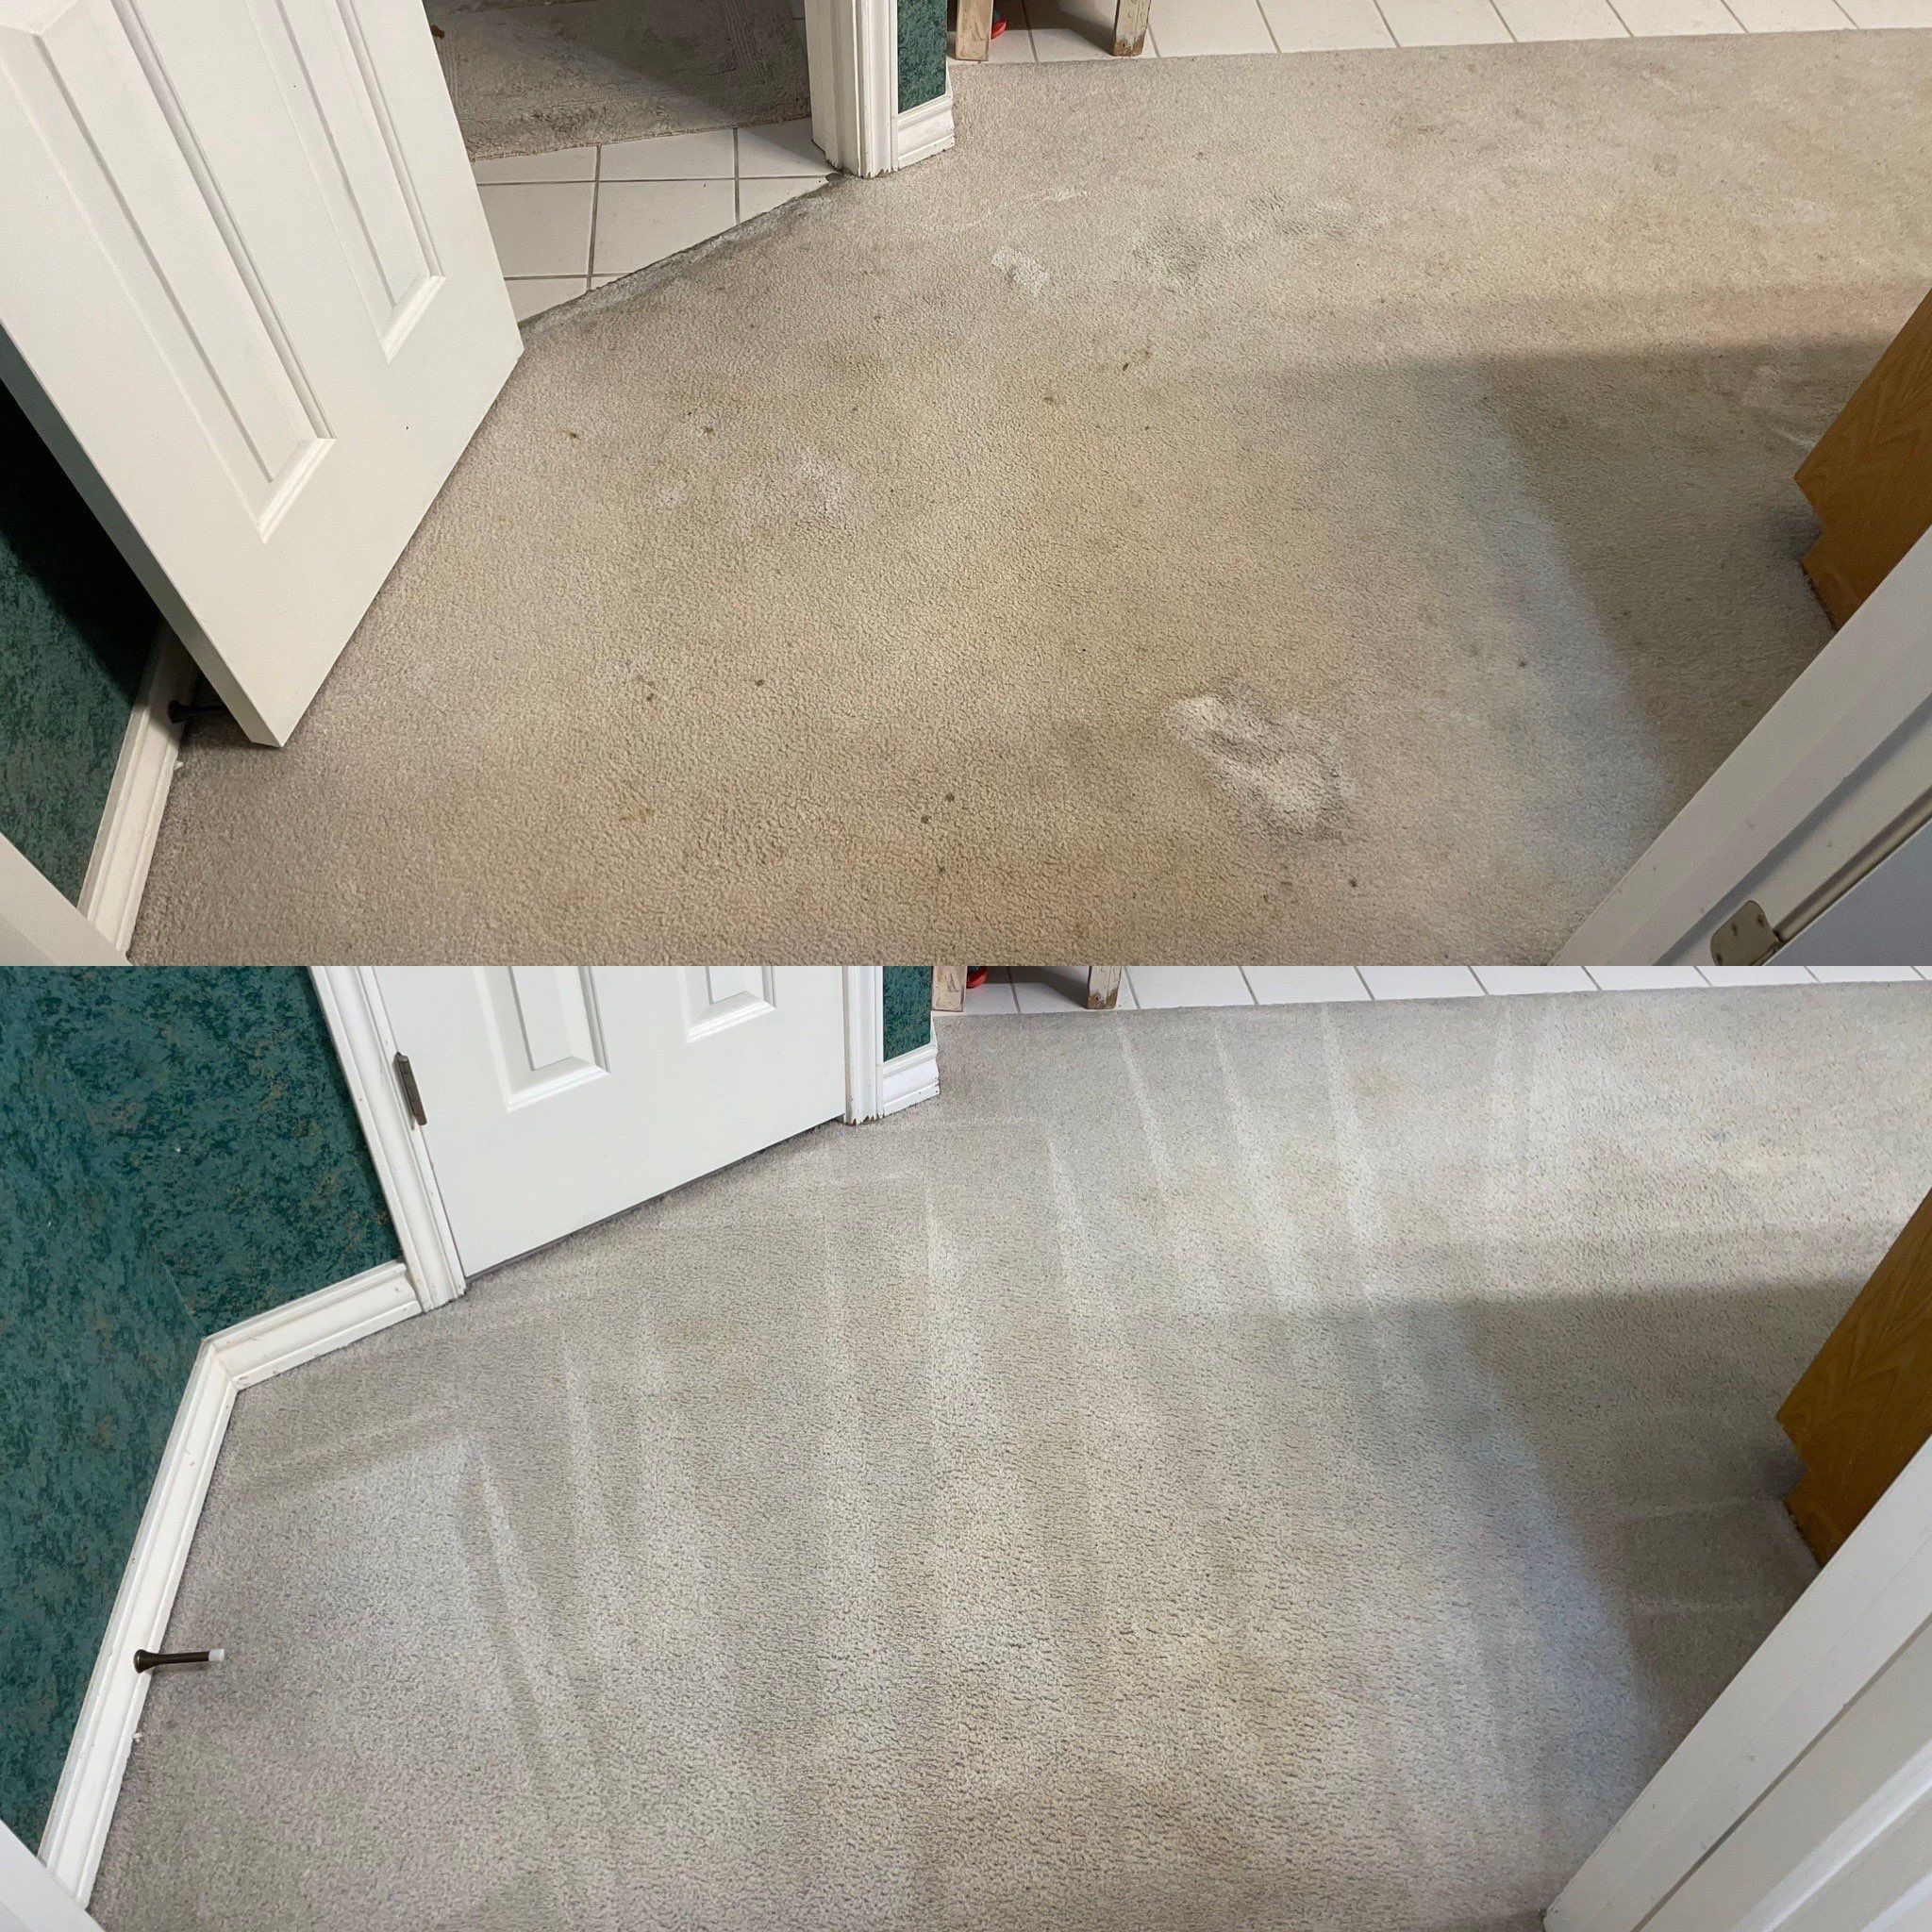 Area Rug Steam Cleaning Project in San Antonio TX 78260